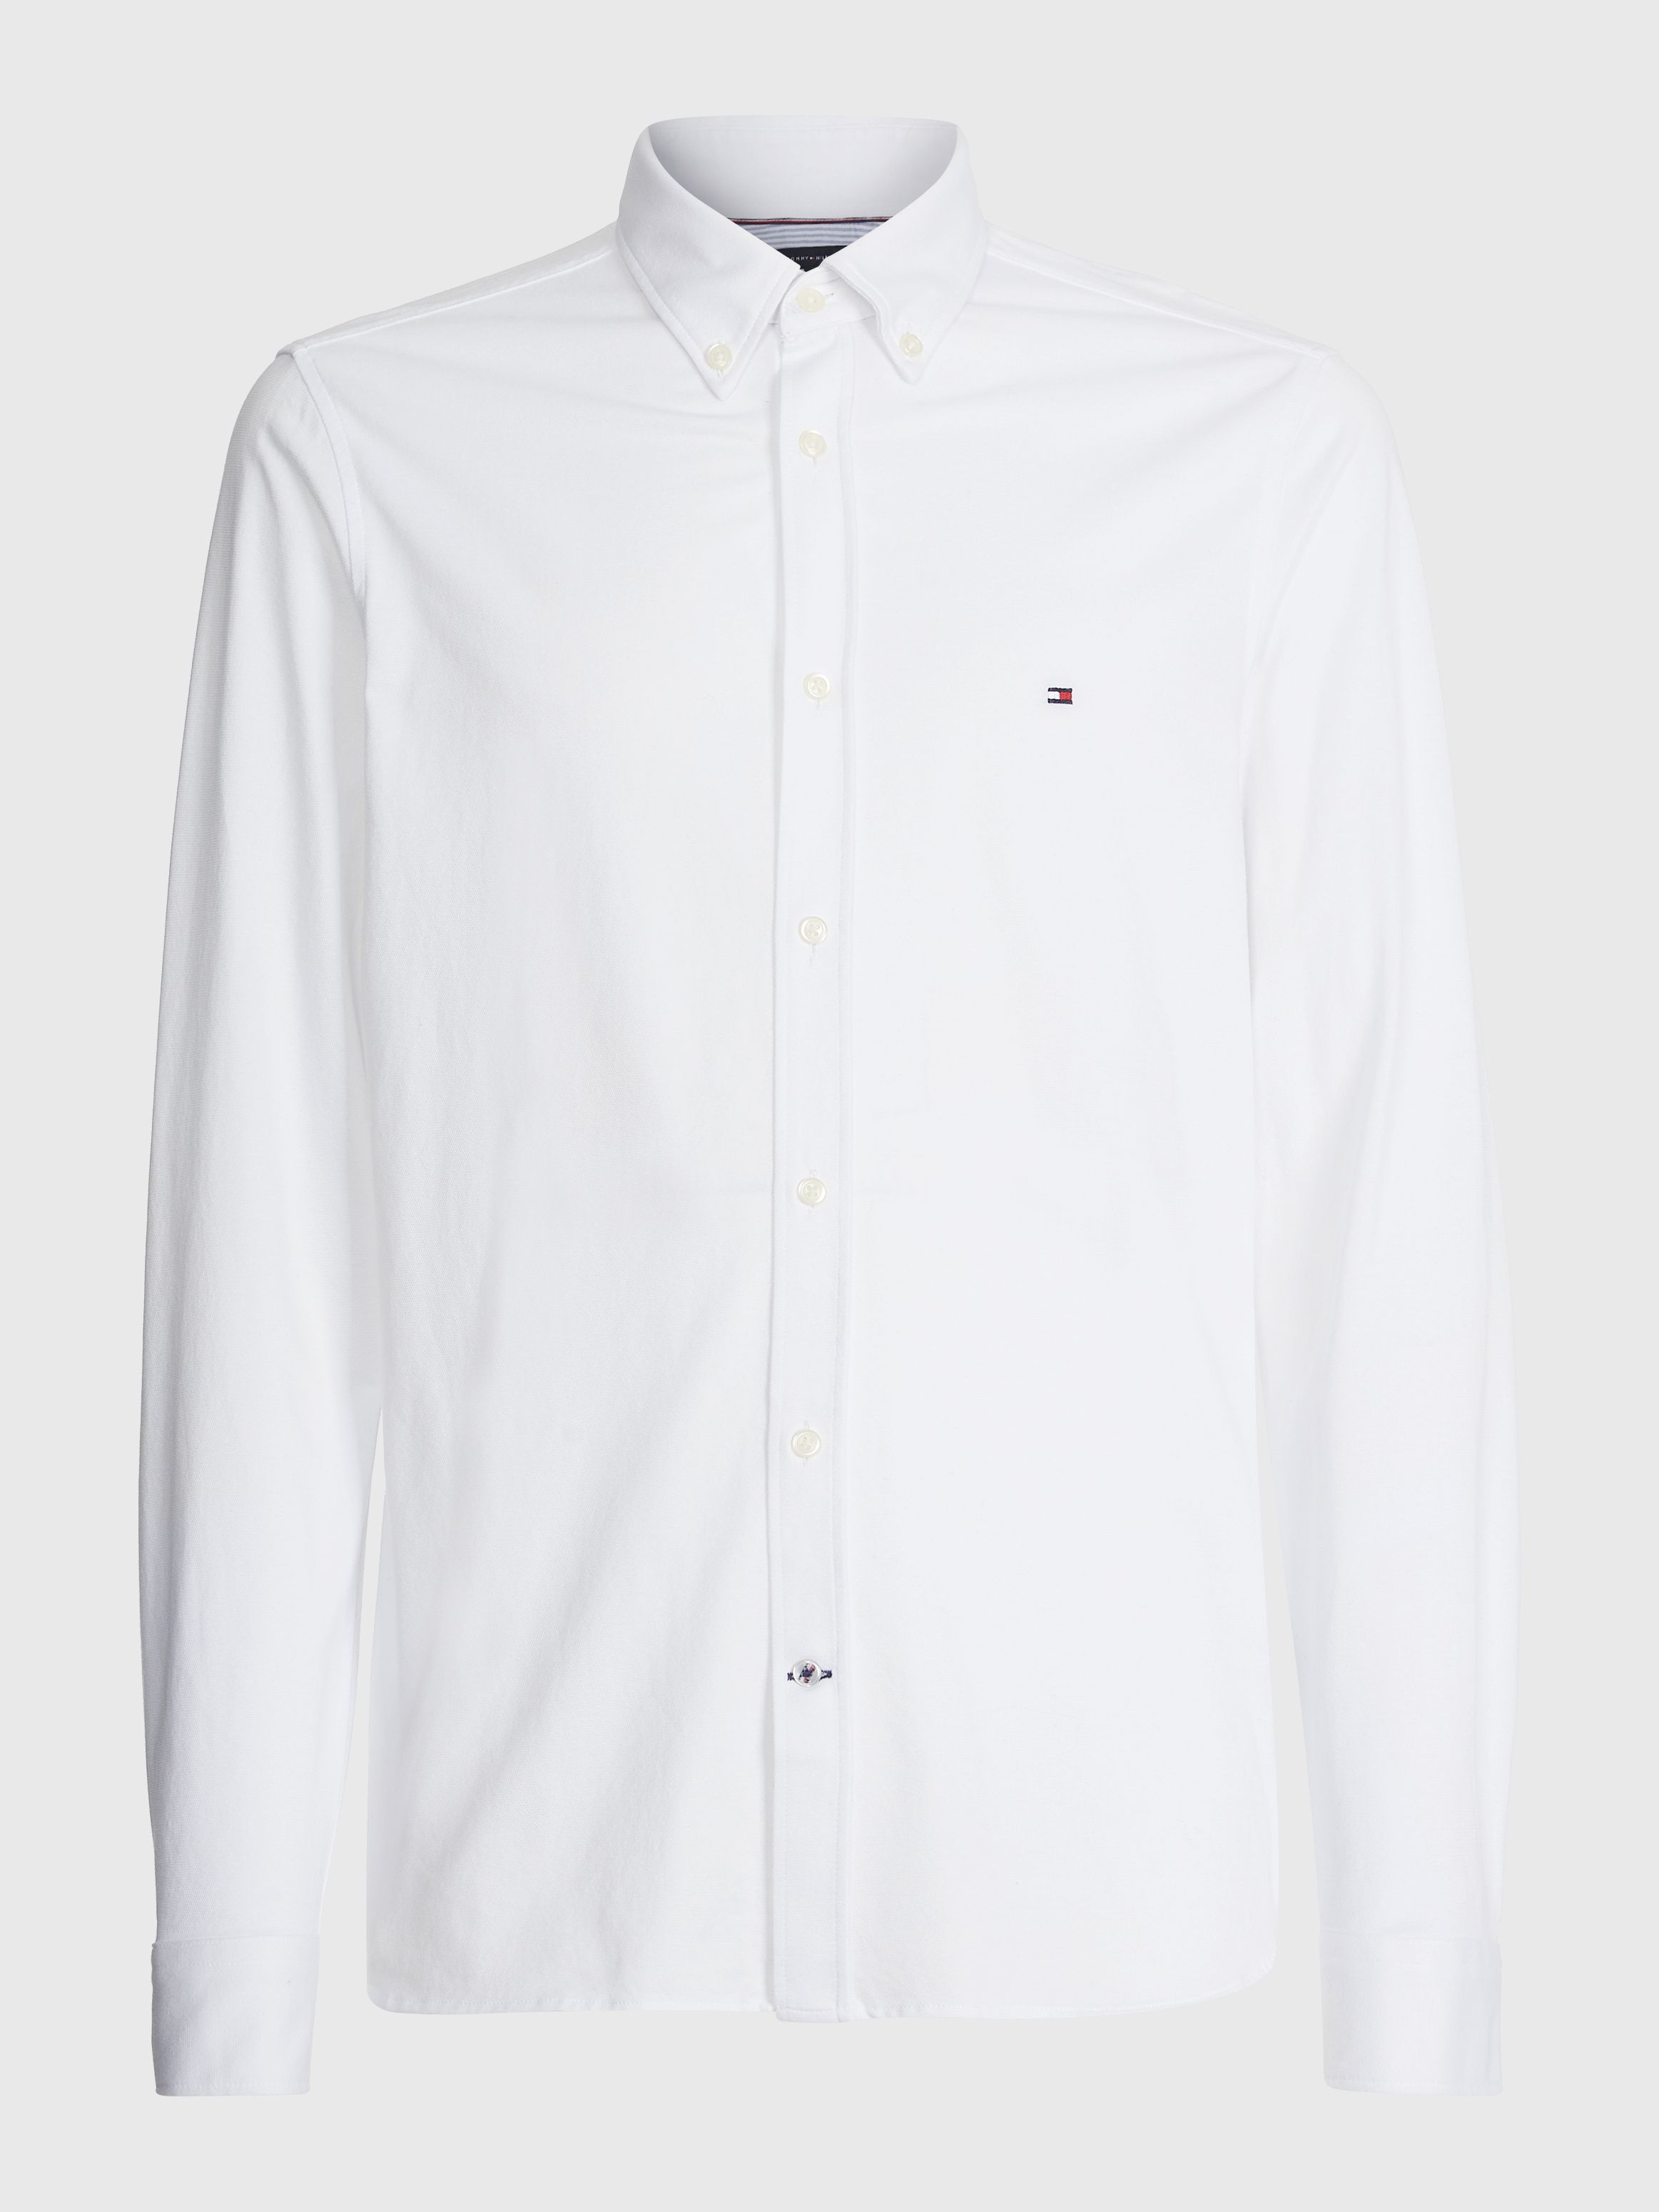 1985 Collection Slim Fit Shirt